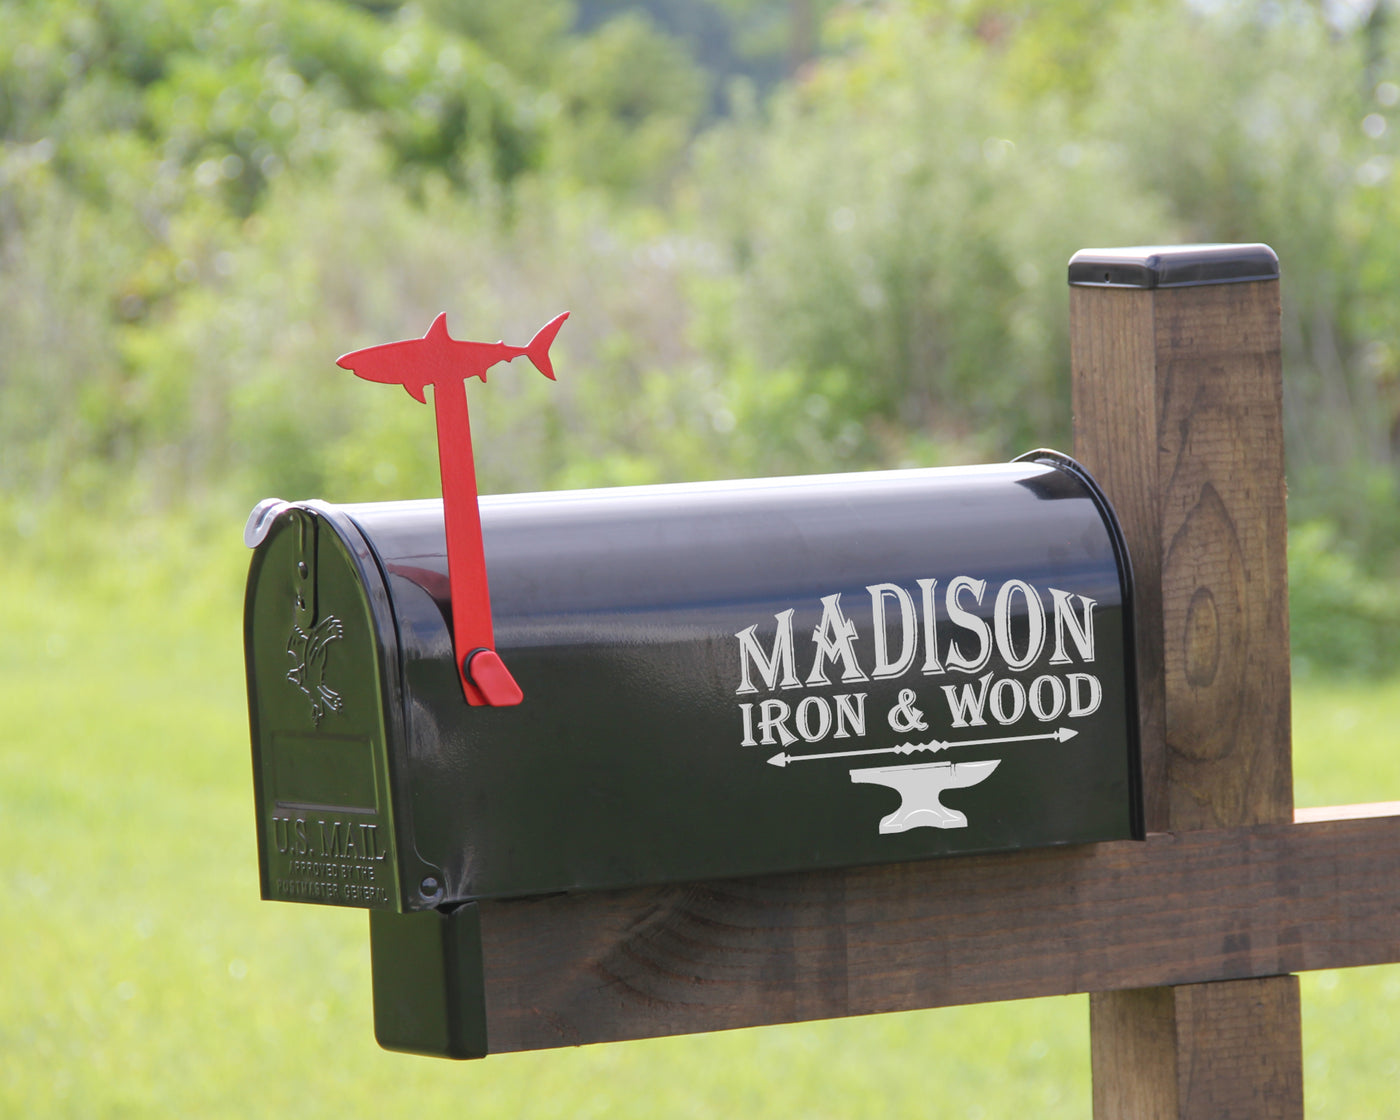 Shark Mailbox Flag - Madison Iron and Wood - Mailbox Post Decor - metal outdoor decor - Steel deocrations - american made products - veteran owned business products - fencing decorations - fencing supplies - custom wall decorations - personalized wall signs - steel - decorative post caps - steel post caps - metal post caps - brackets - structural brackets - home improvement - easter - easter decorations - easter gift - easter yard decor